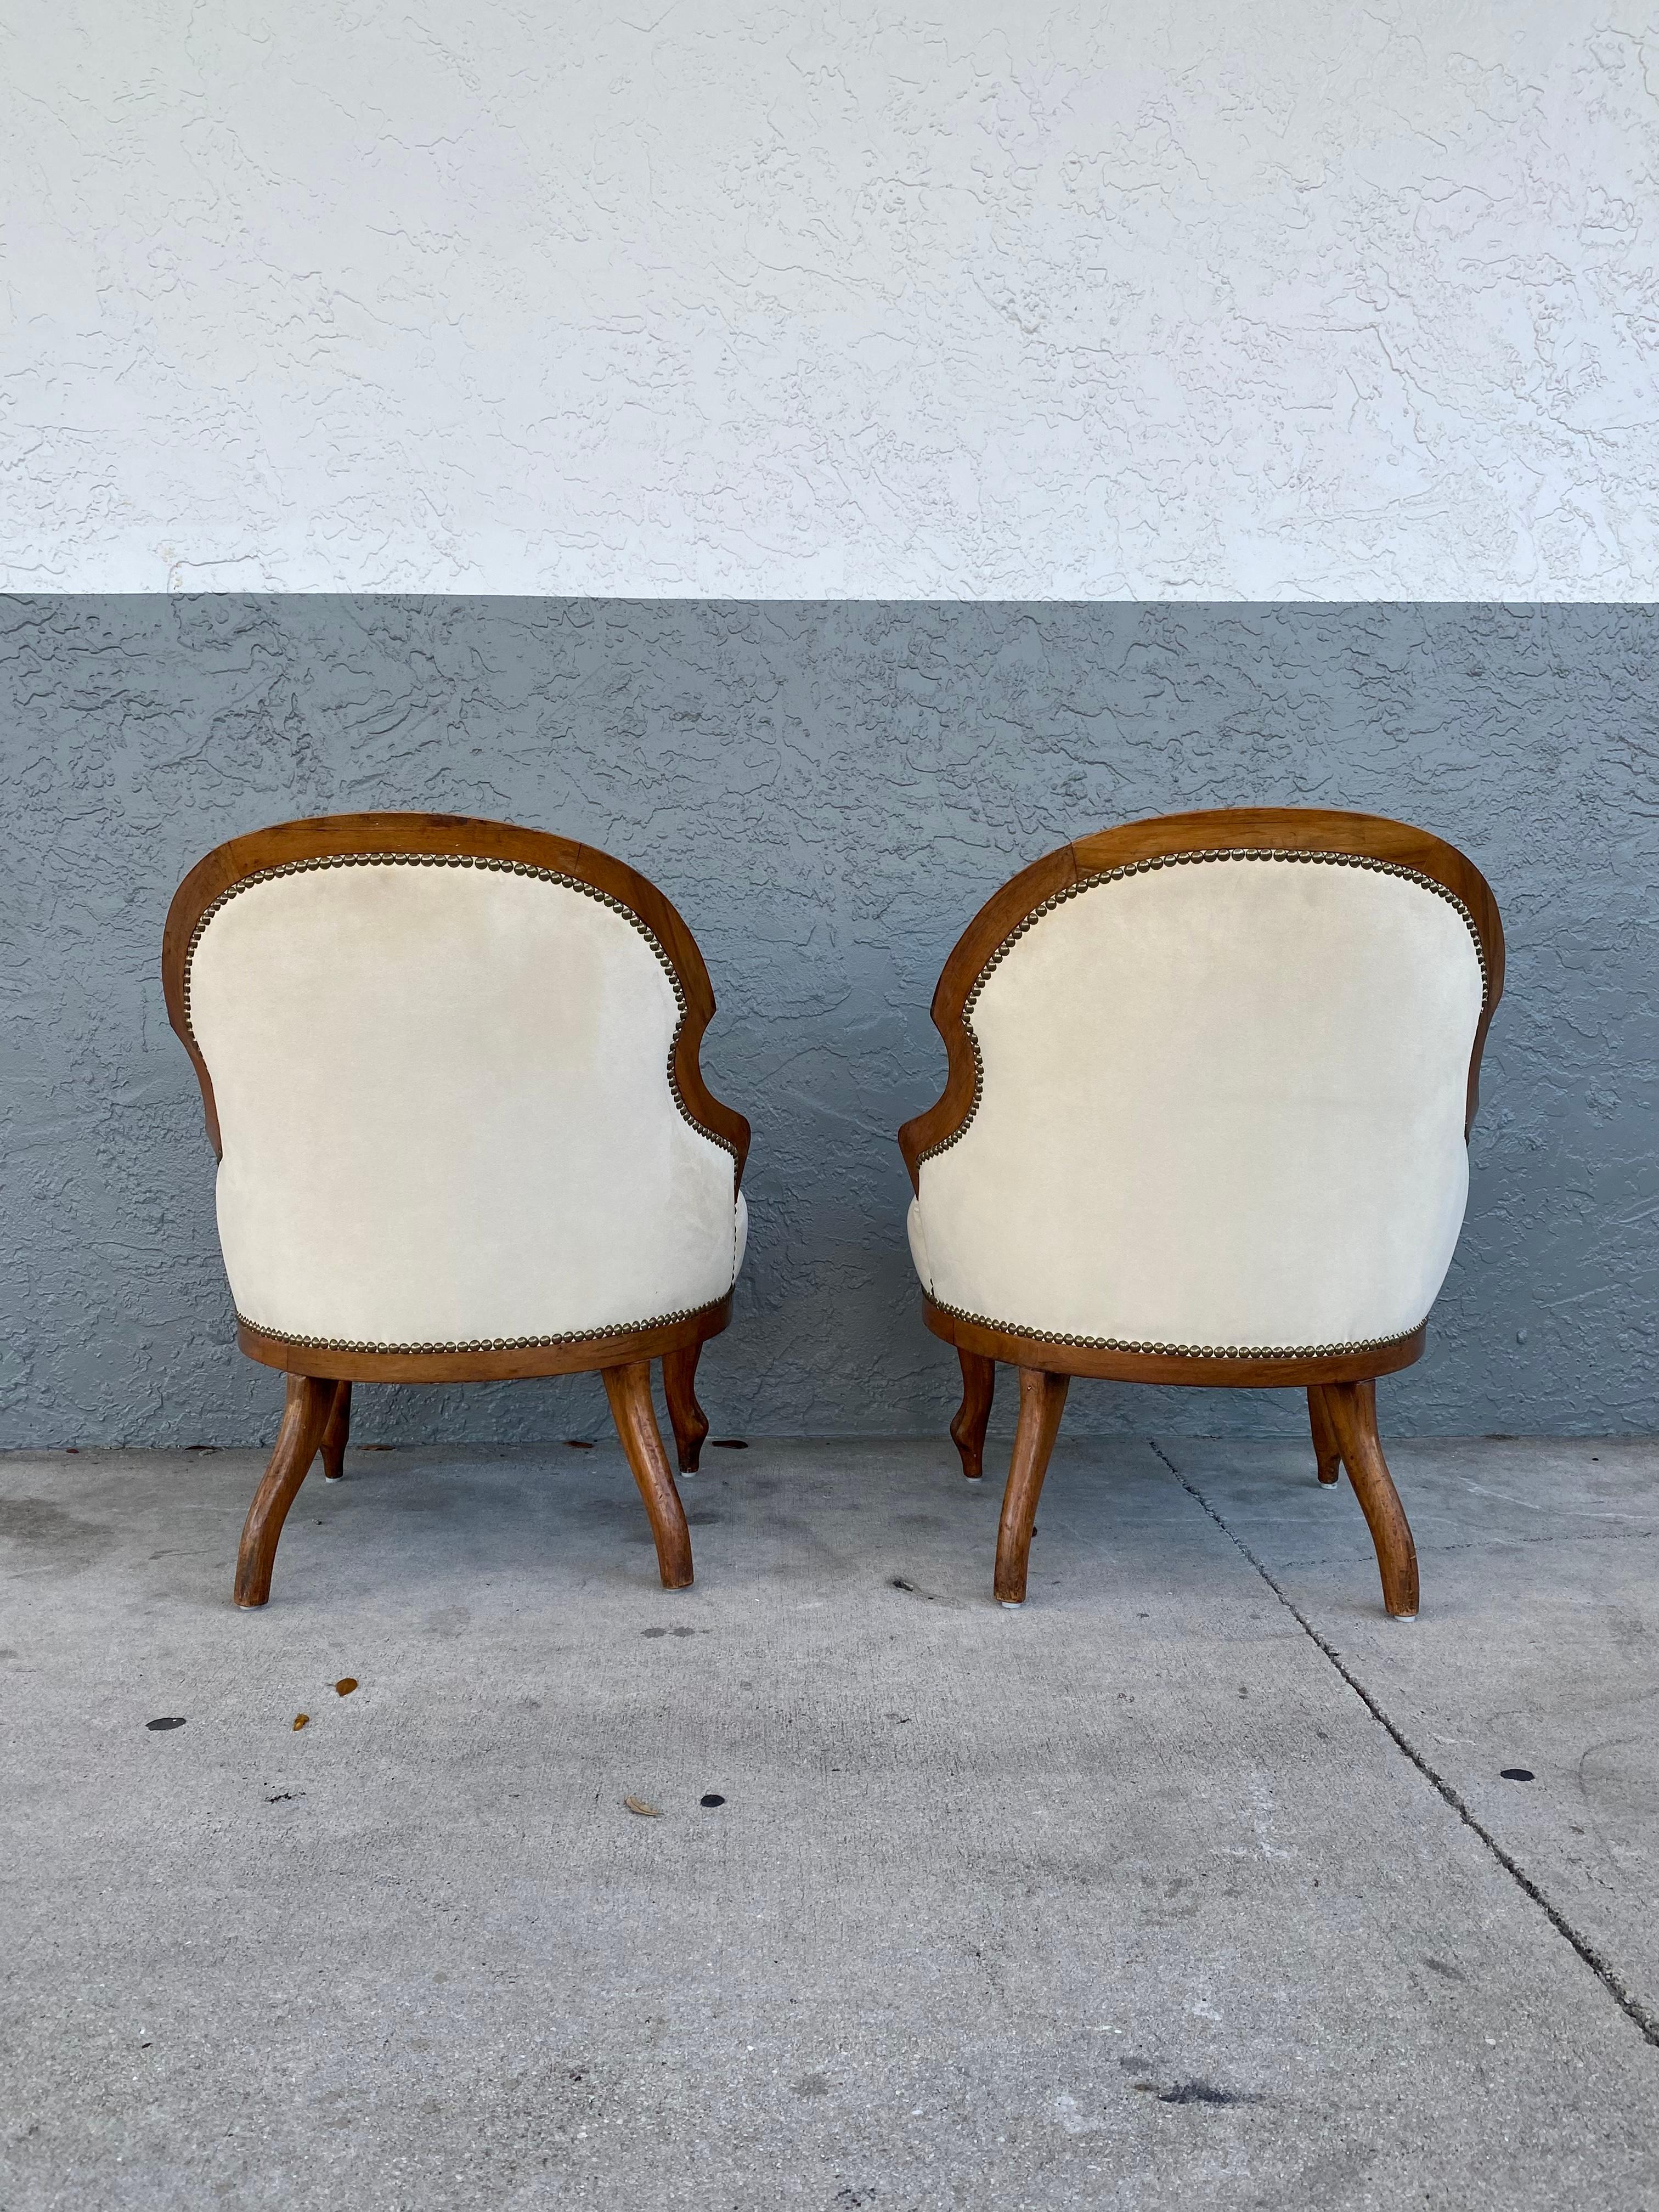 Upholstery 1940s Petite Nailhead Spoon Curved Rounded Slipper Chairs, Set of 2 For Sale